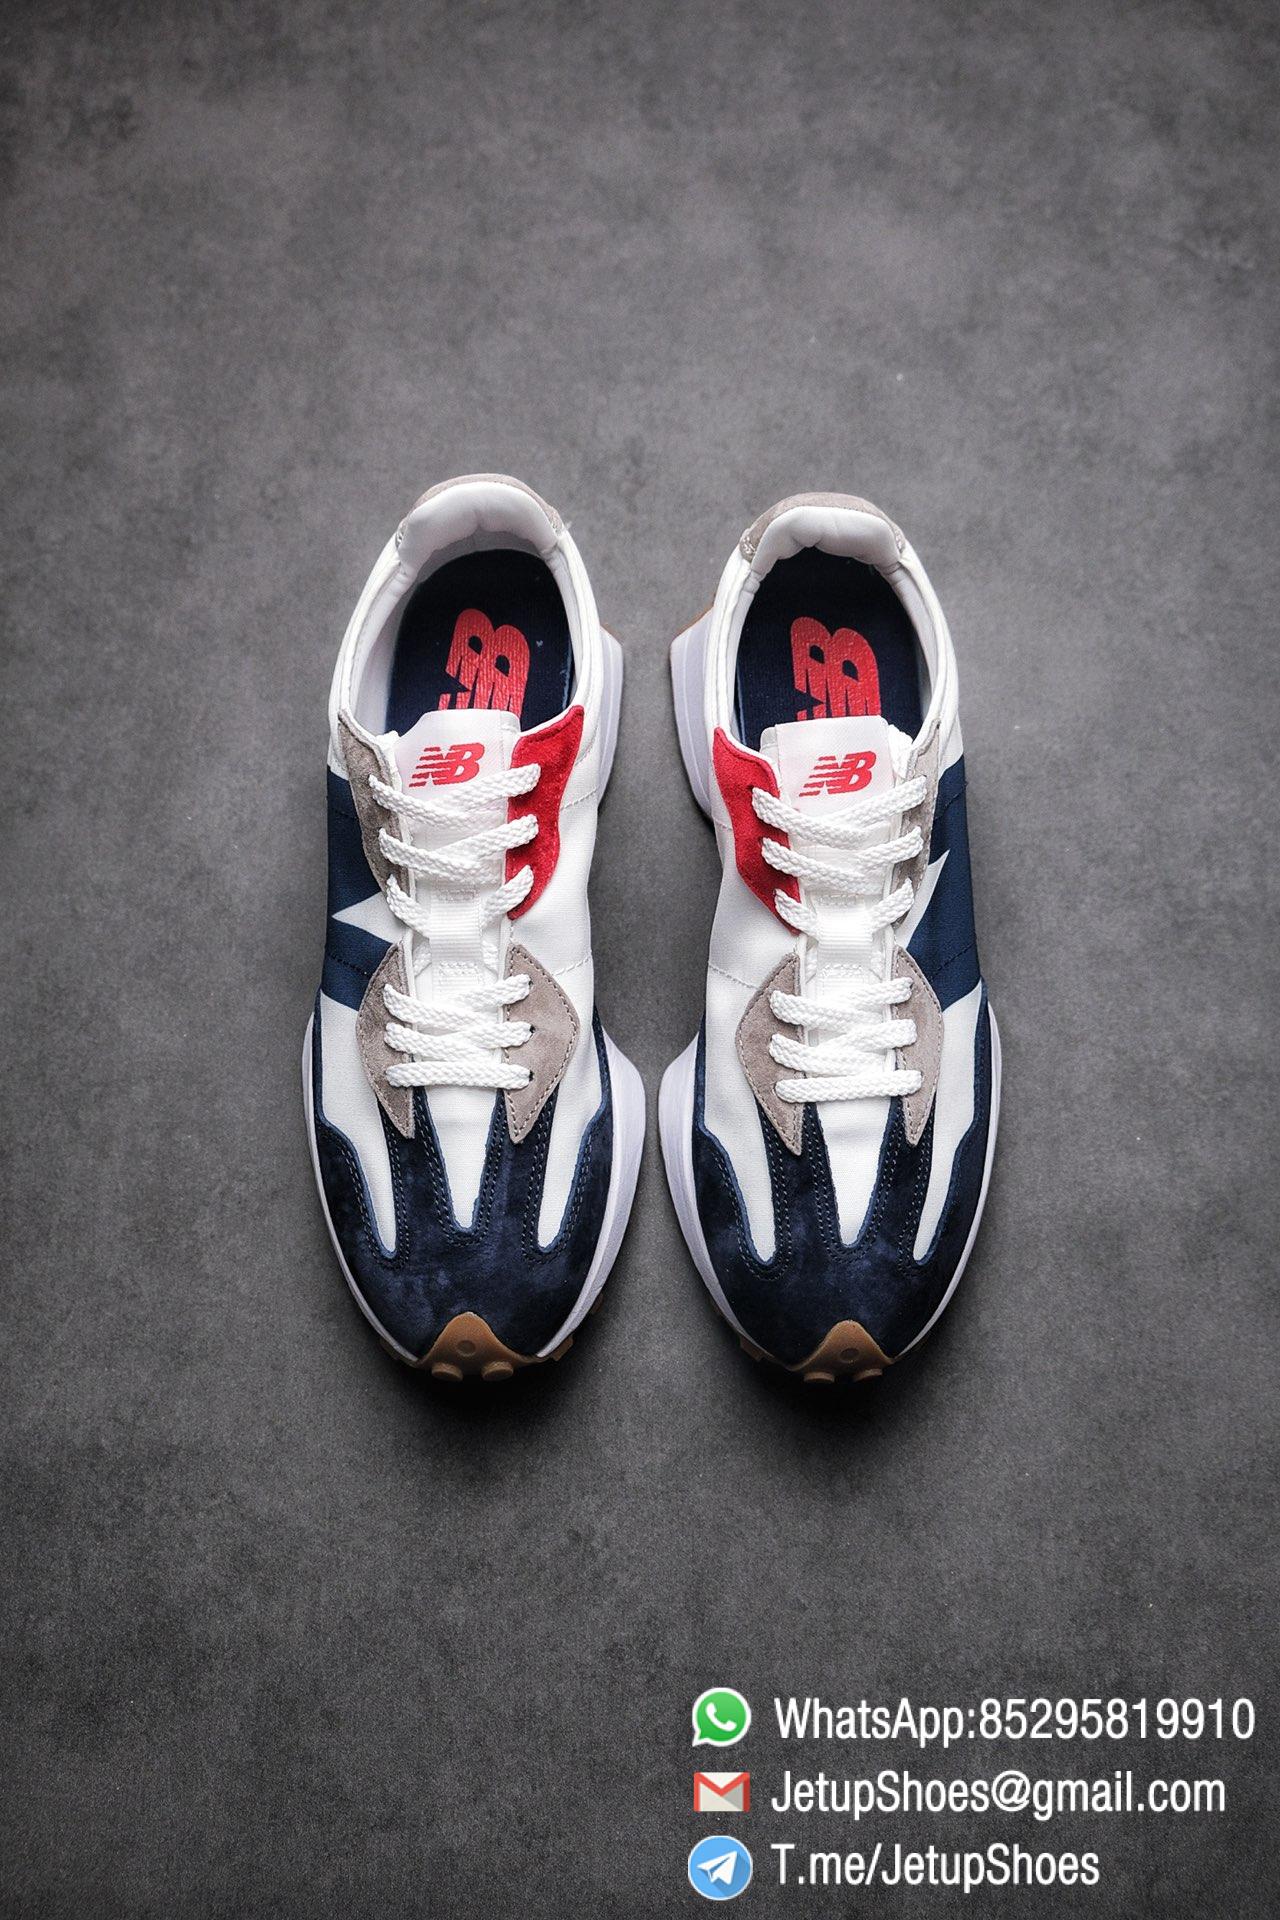 Best Replica New Balance 327 Navy White Gum Running Shoes SKU MS327WR Top Quality Snkrs 02